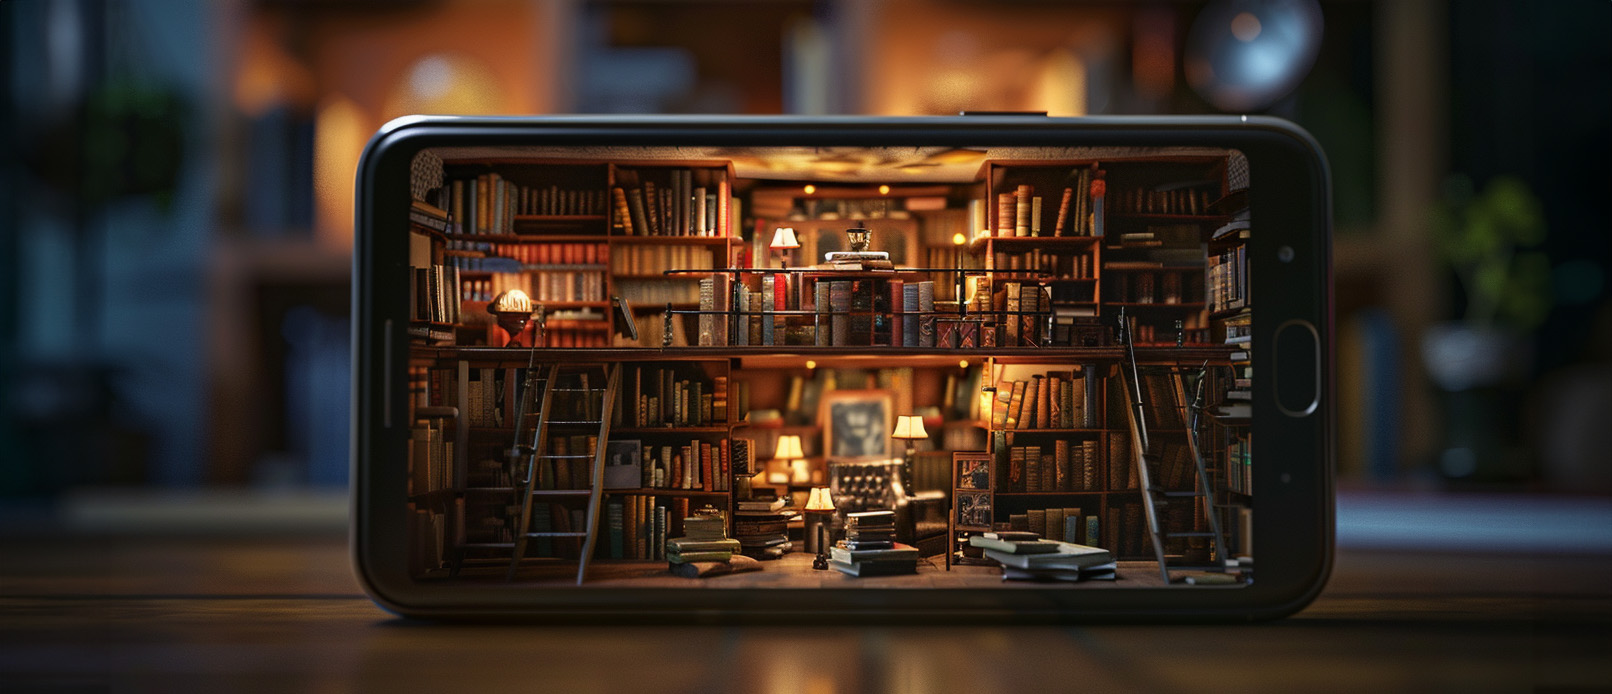 A photo of a library inside a smartphone